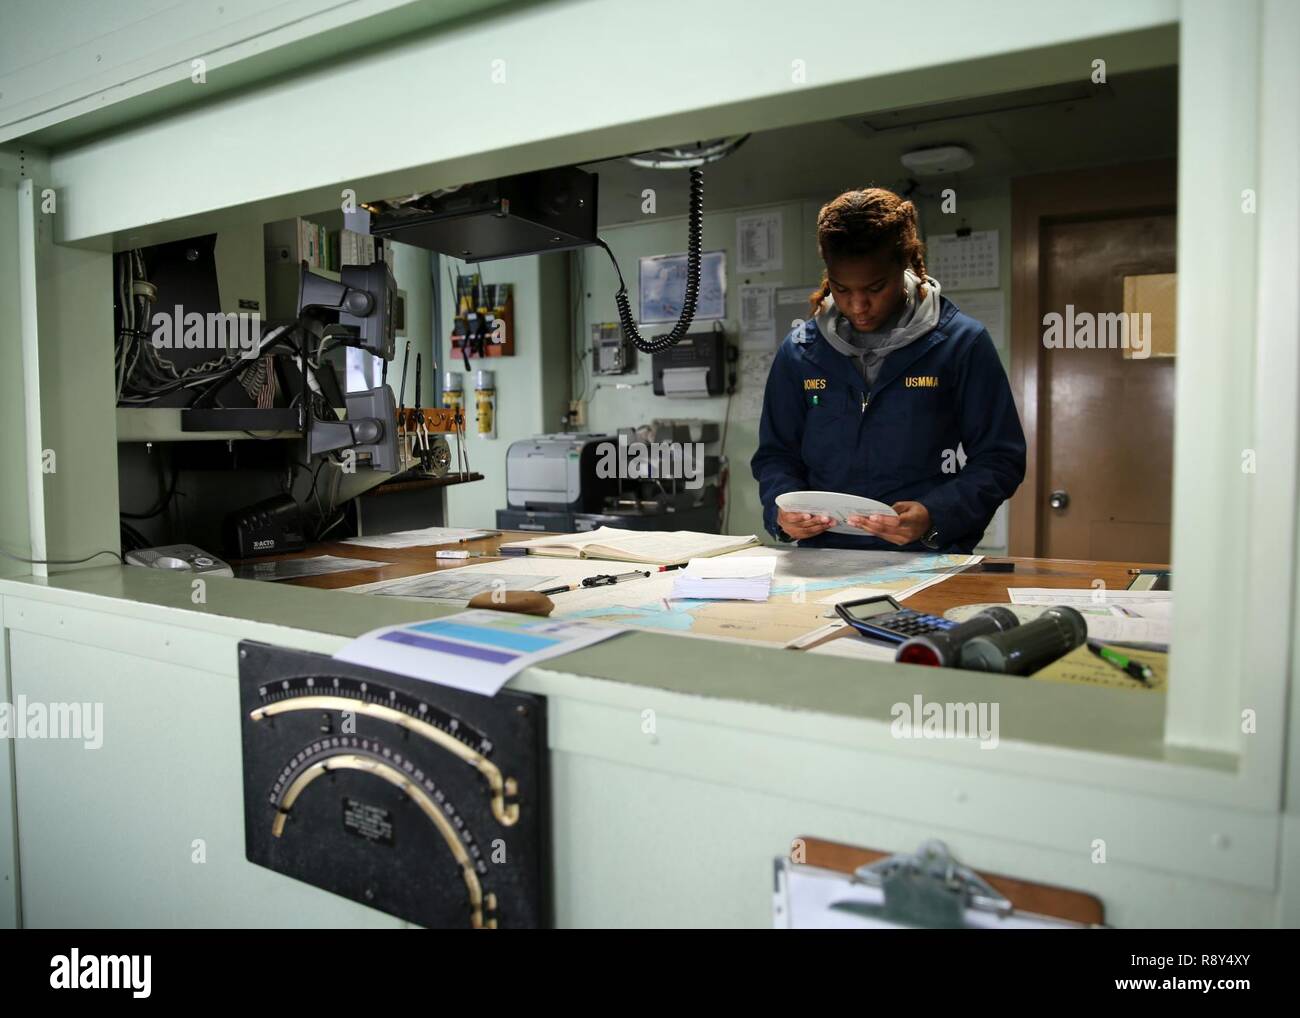 ATLANTIC OCEAN (February 21, 2017)--Deck Cadet Victoria Jones, a midshipment at the United States Merchant Marine Academy, makes calculations with wind wheel from the bridge of Military Sealift Command's hospital ship USNS Comfort (T-AH 20), Feb. 21. Six midshipment are currently attached to Comfort as part of their 'Sea Year' which is designed to provide cadets with practical training. Stock Photo